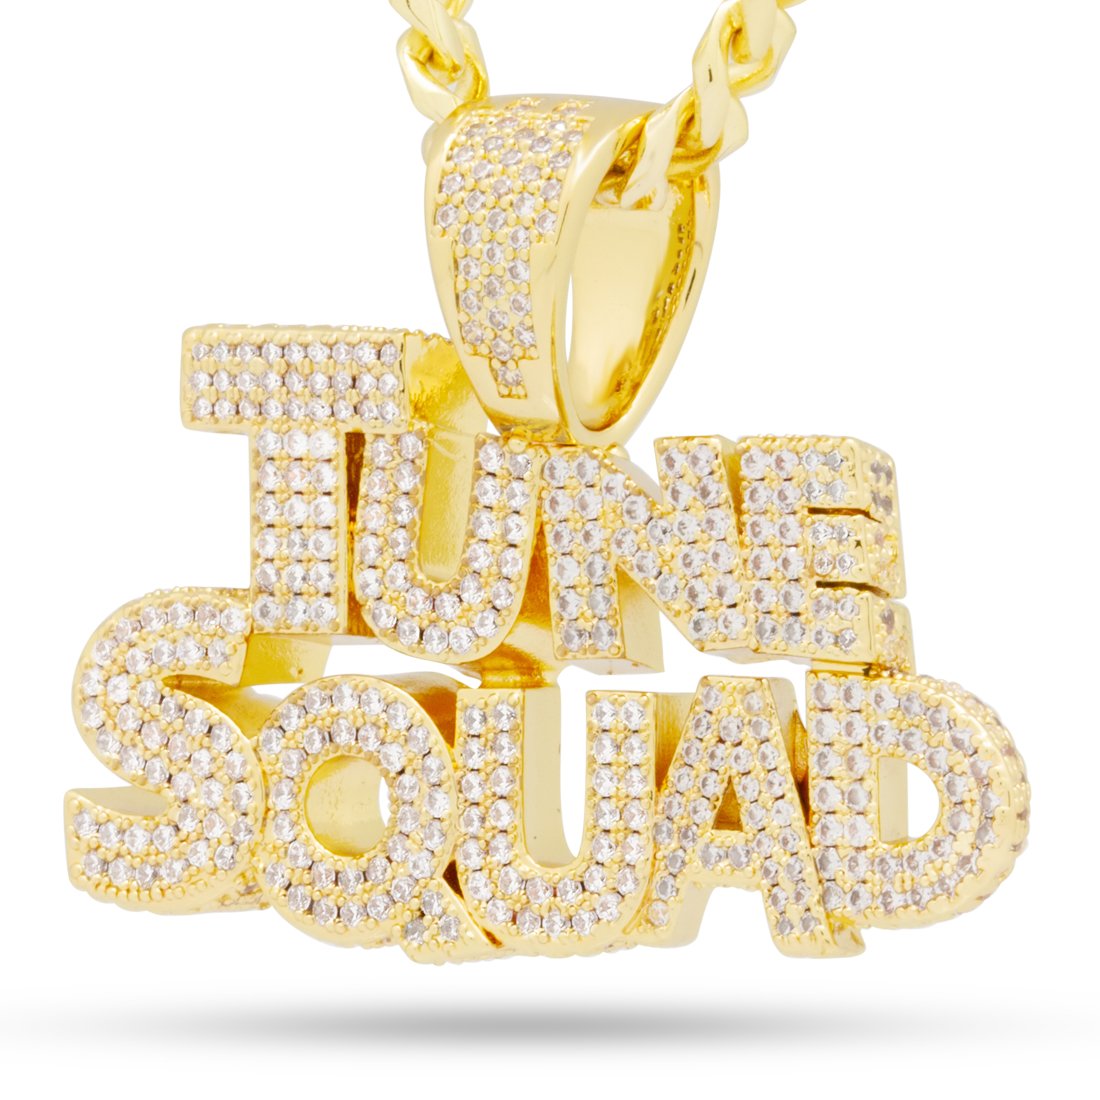 Space Jam x King Ice - Tune Squad Necklace White Gold / 1.4"